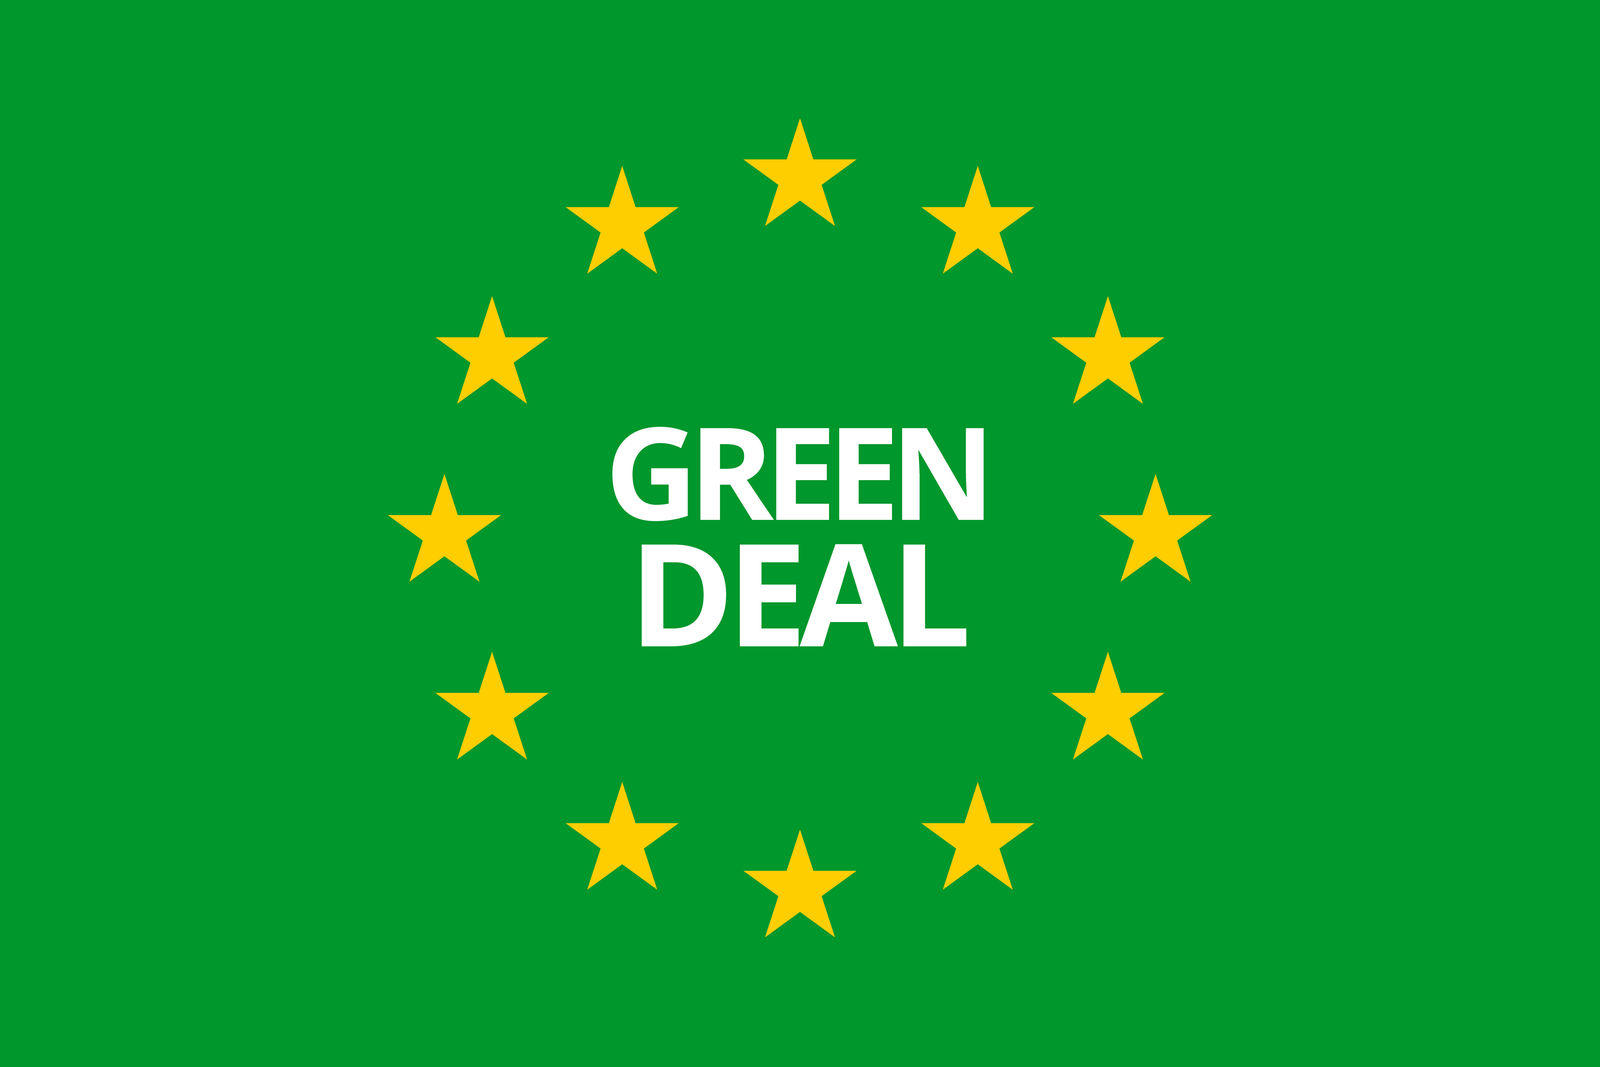 CEO Initiative for Europe's Green Deal